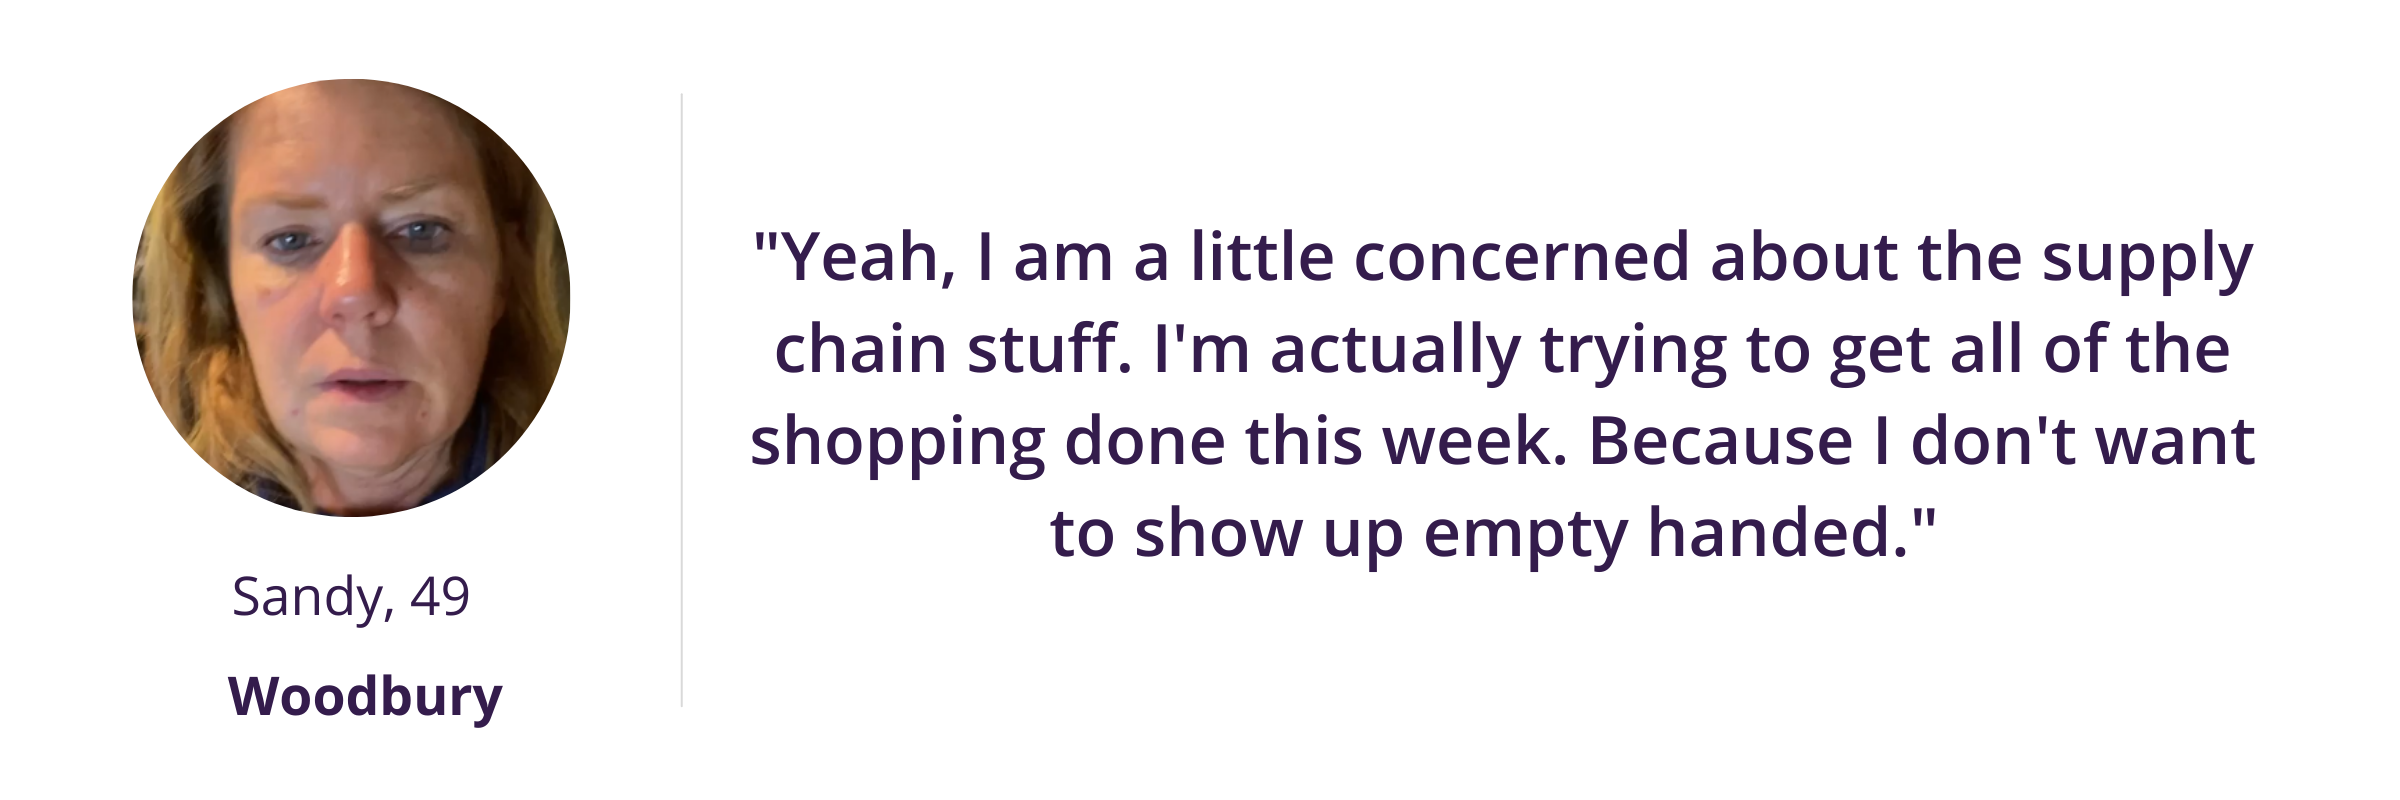 "Yeah, I am a little concerned about the supply chain stuff. I'm actually trying to get all of the shopping done this week. Because I don't want to show up empty handed." 